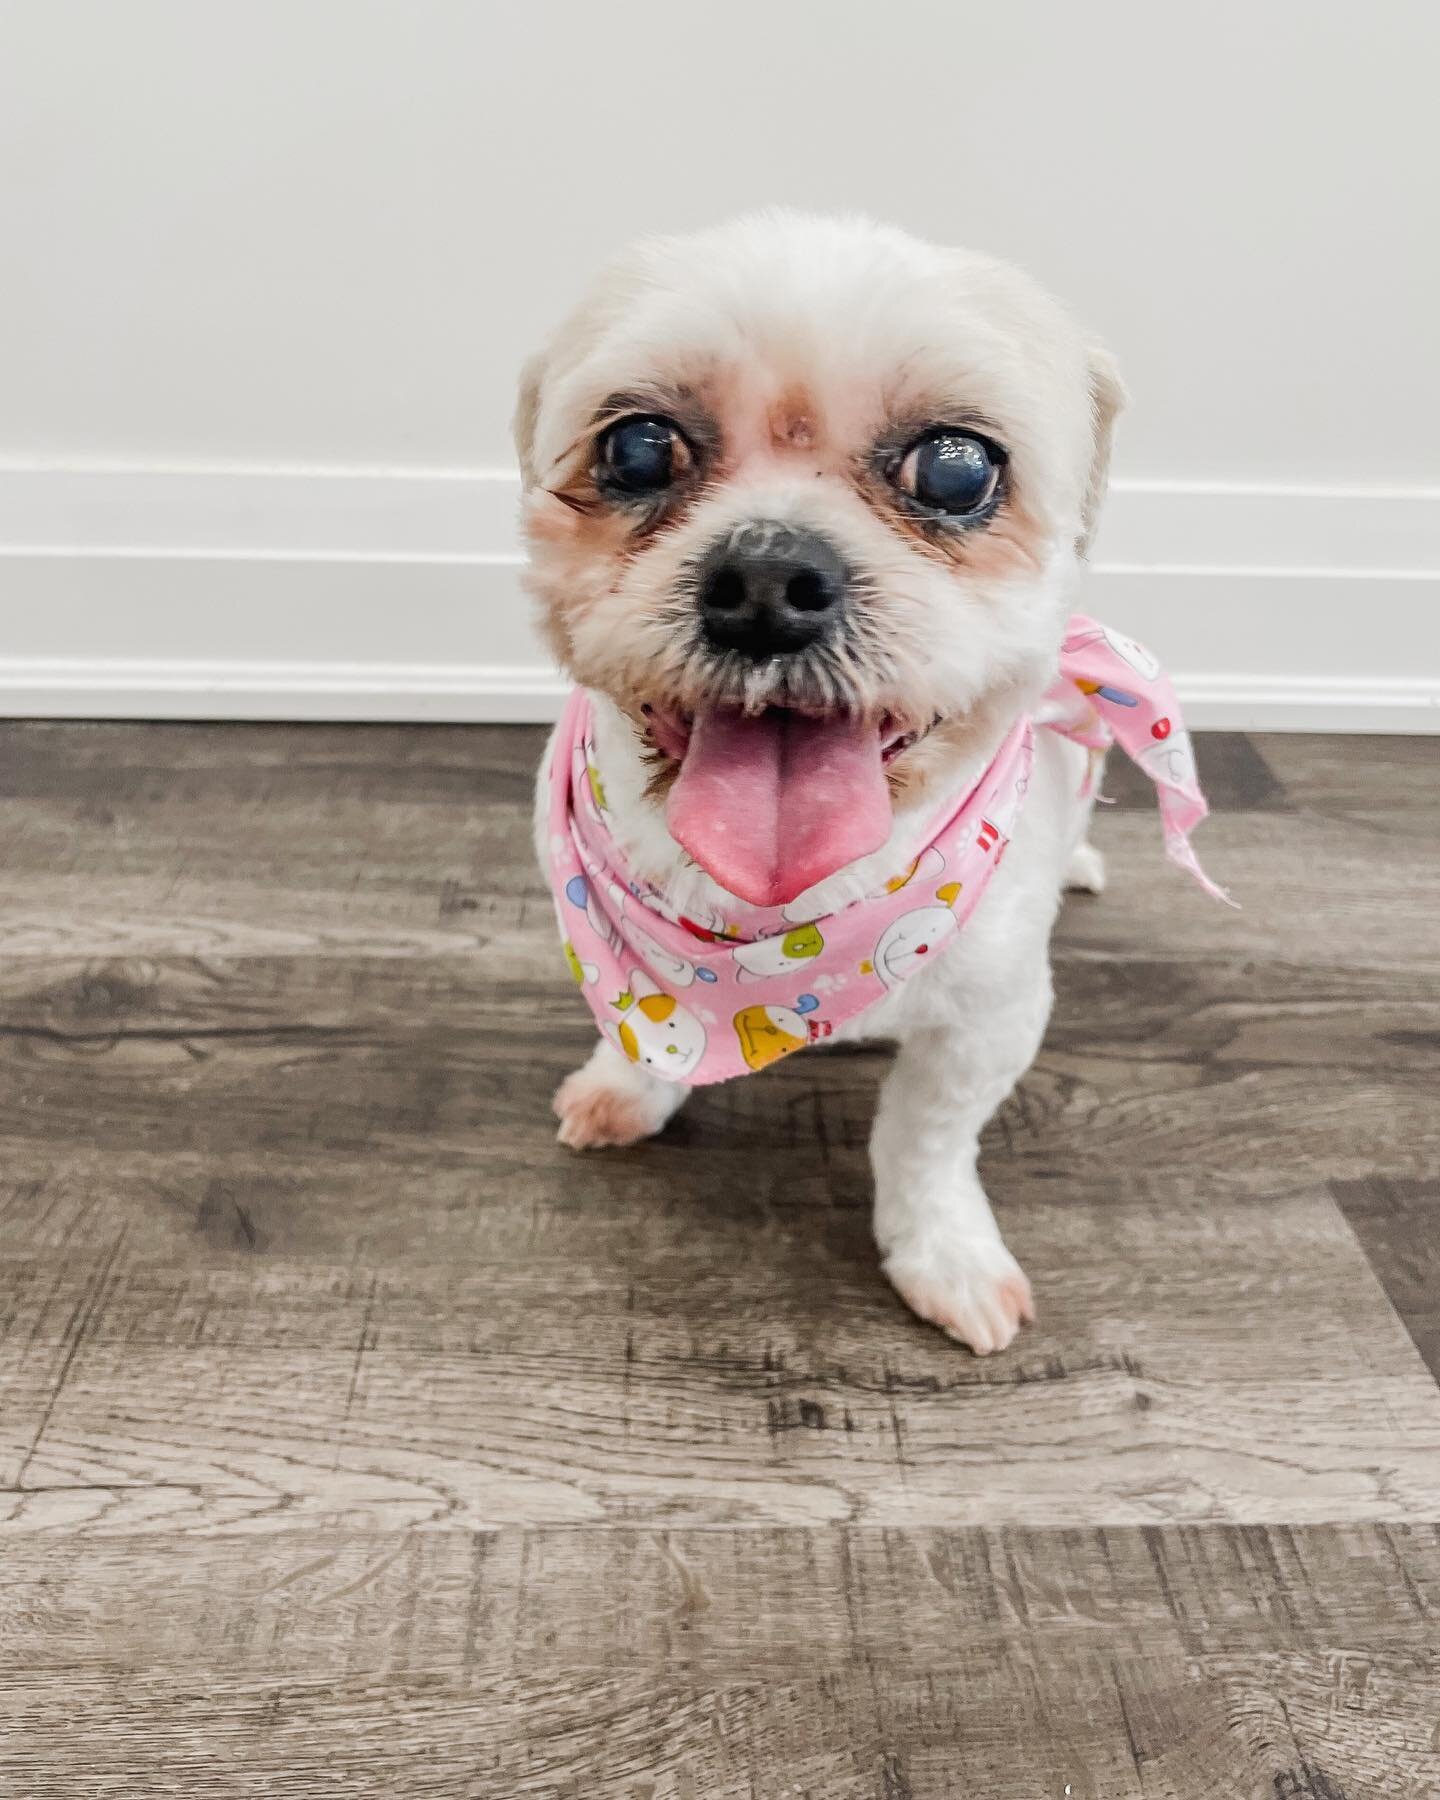 Meet Pippy! She came in for her groom and brought her 2 month old sister, Greta Garbo. 
🐾
Swipe to see some cute pictures of these two and Kaitlyn posing with GG.